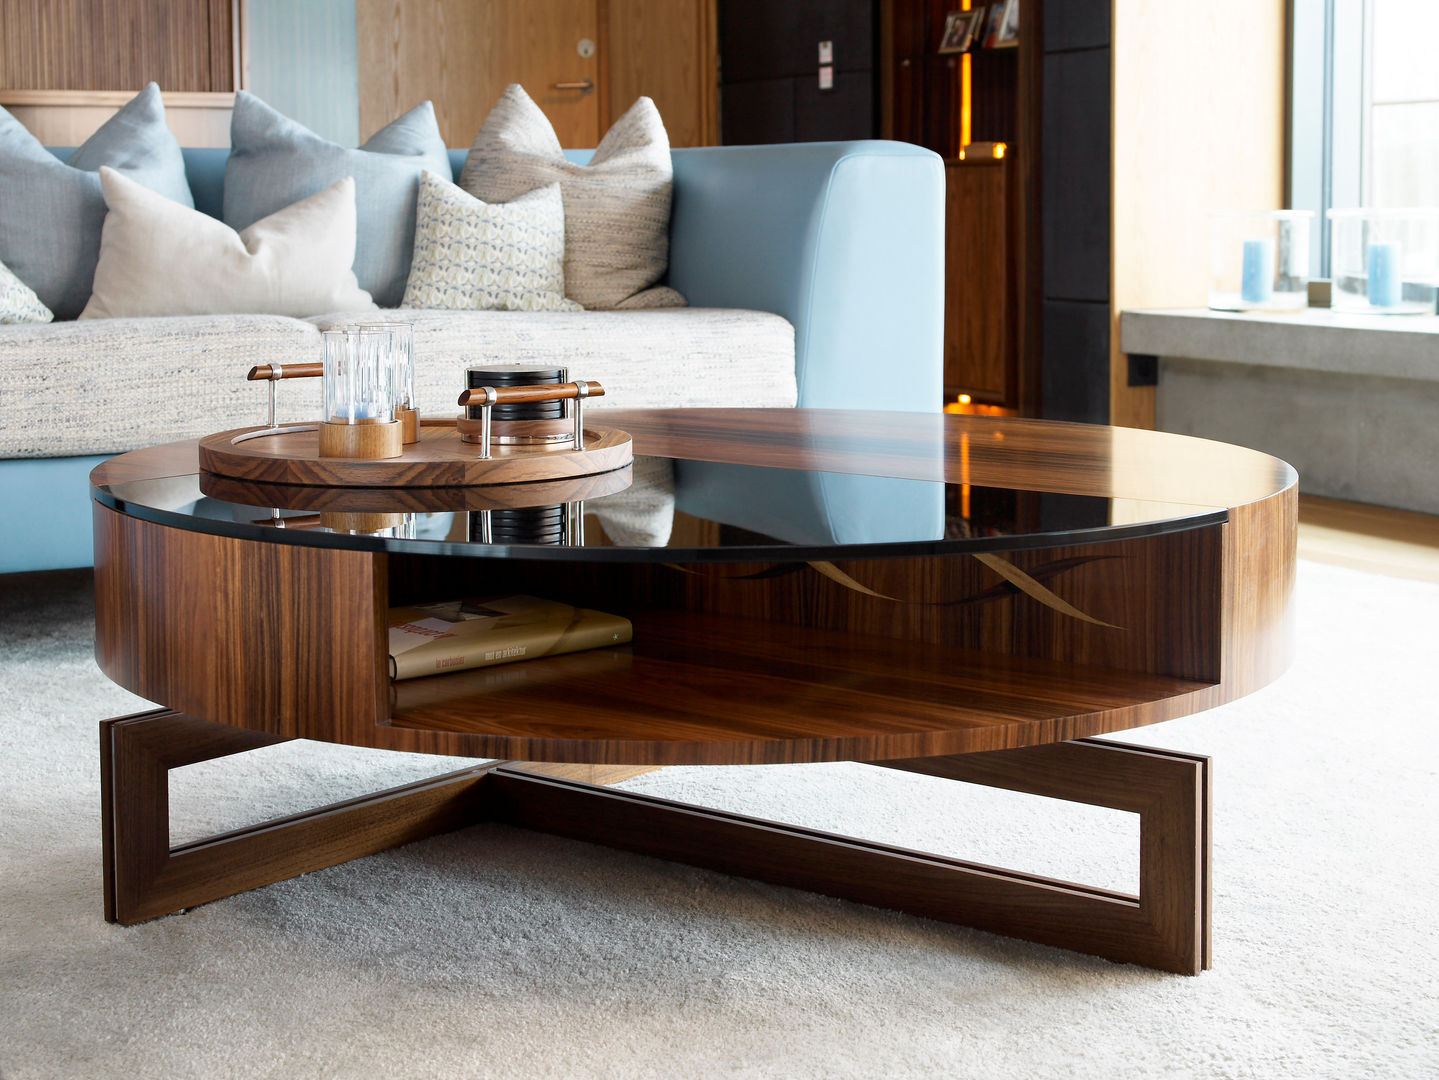 The perfect coffee table - Private Residence, Oslo LINLEY London Modern living room Storage